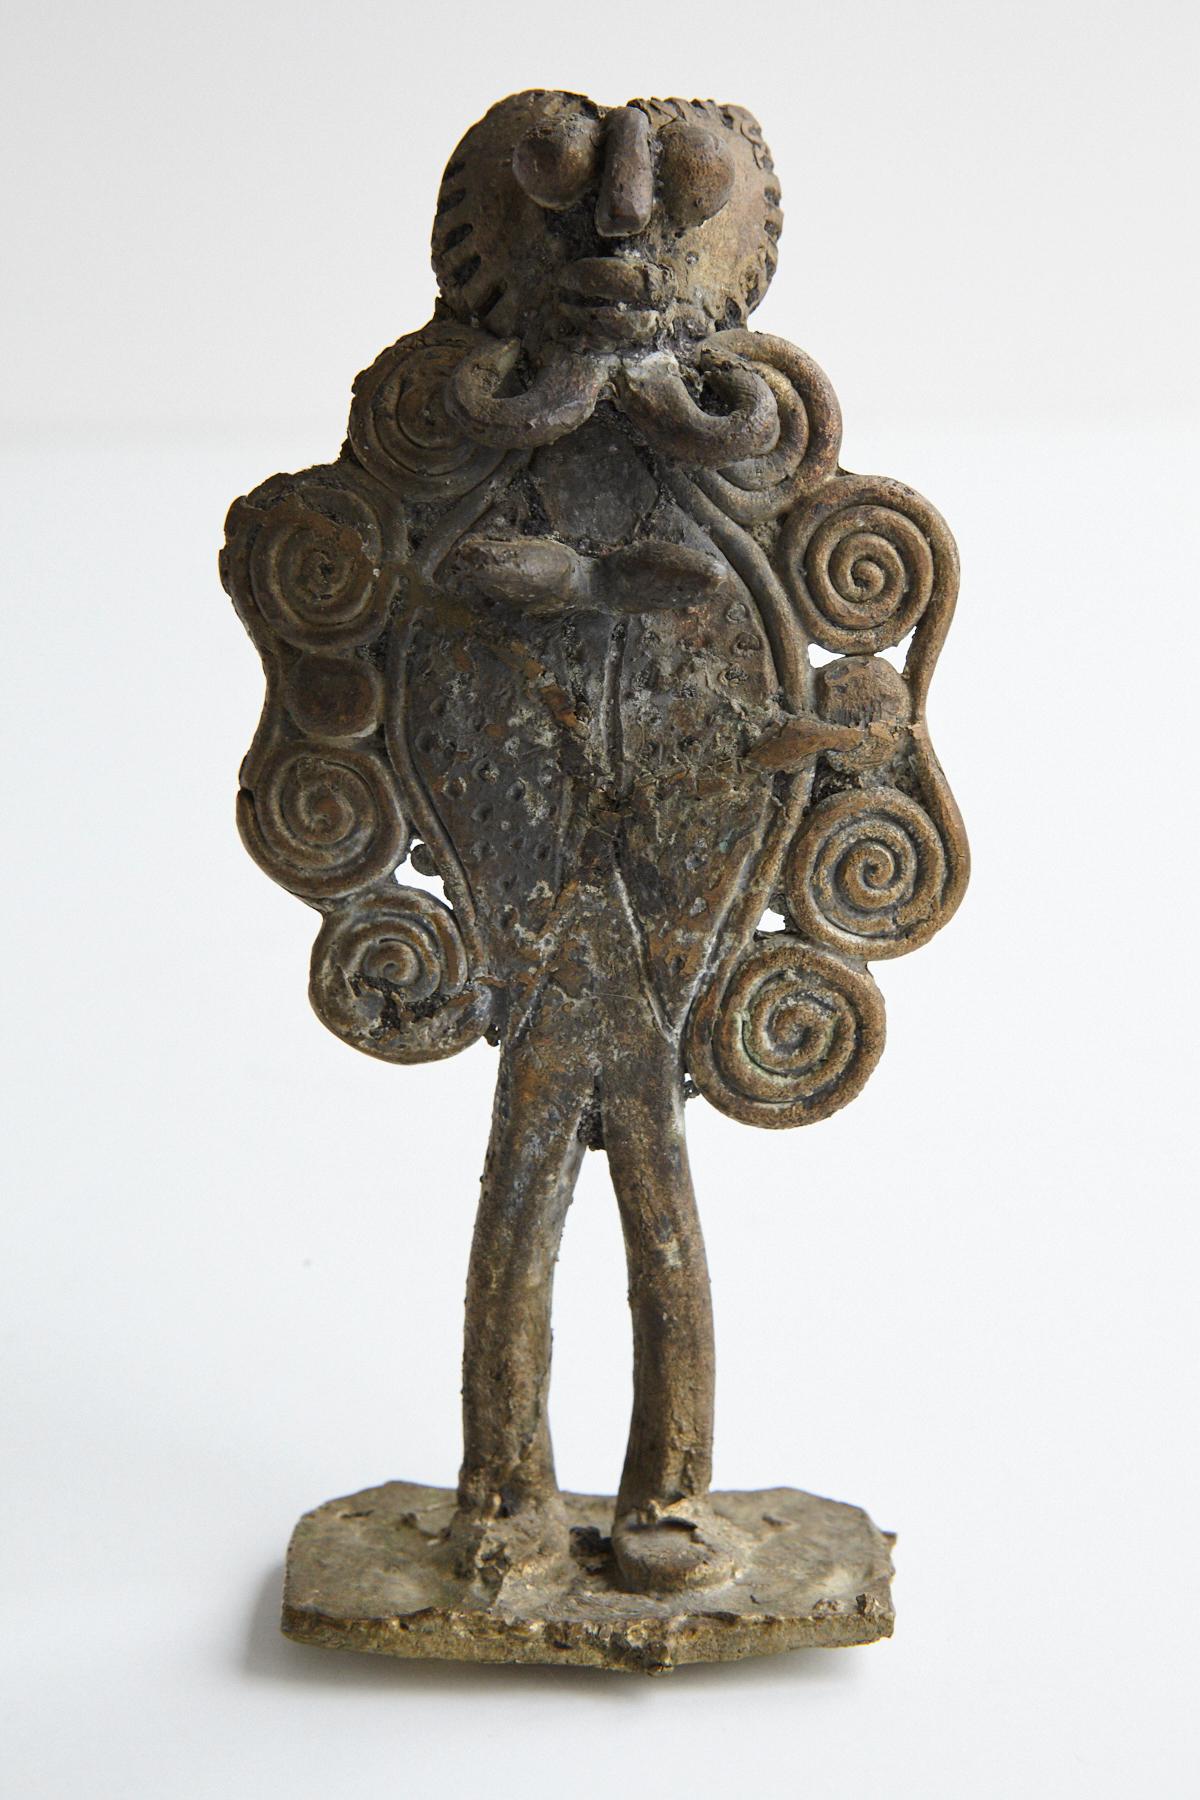 Akan Ashanti cast bronze figurine. The Ashanti or Asante People from Ghana have a rich tradition of crafting bronze pieces to commemorate important figures from their culture or people from their tribe or family. 
The figurines are usually made